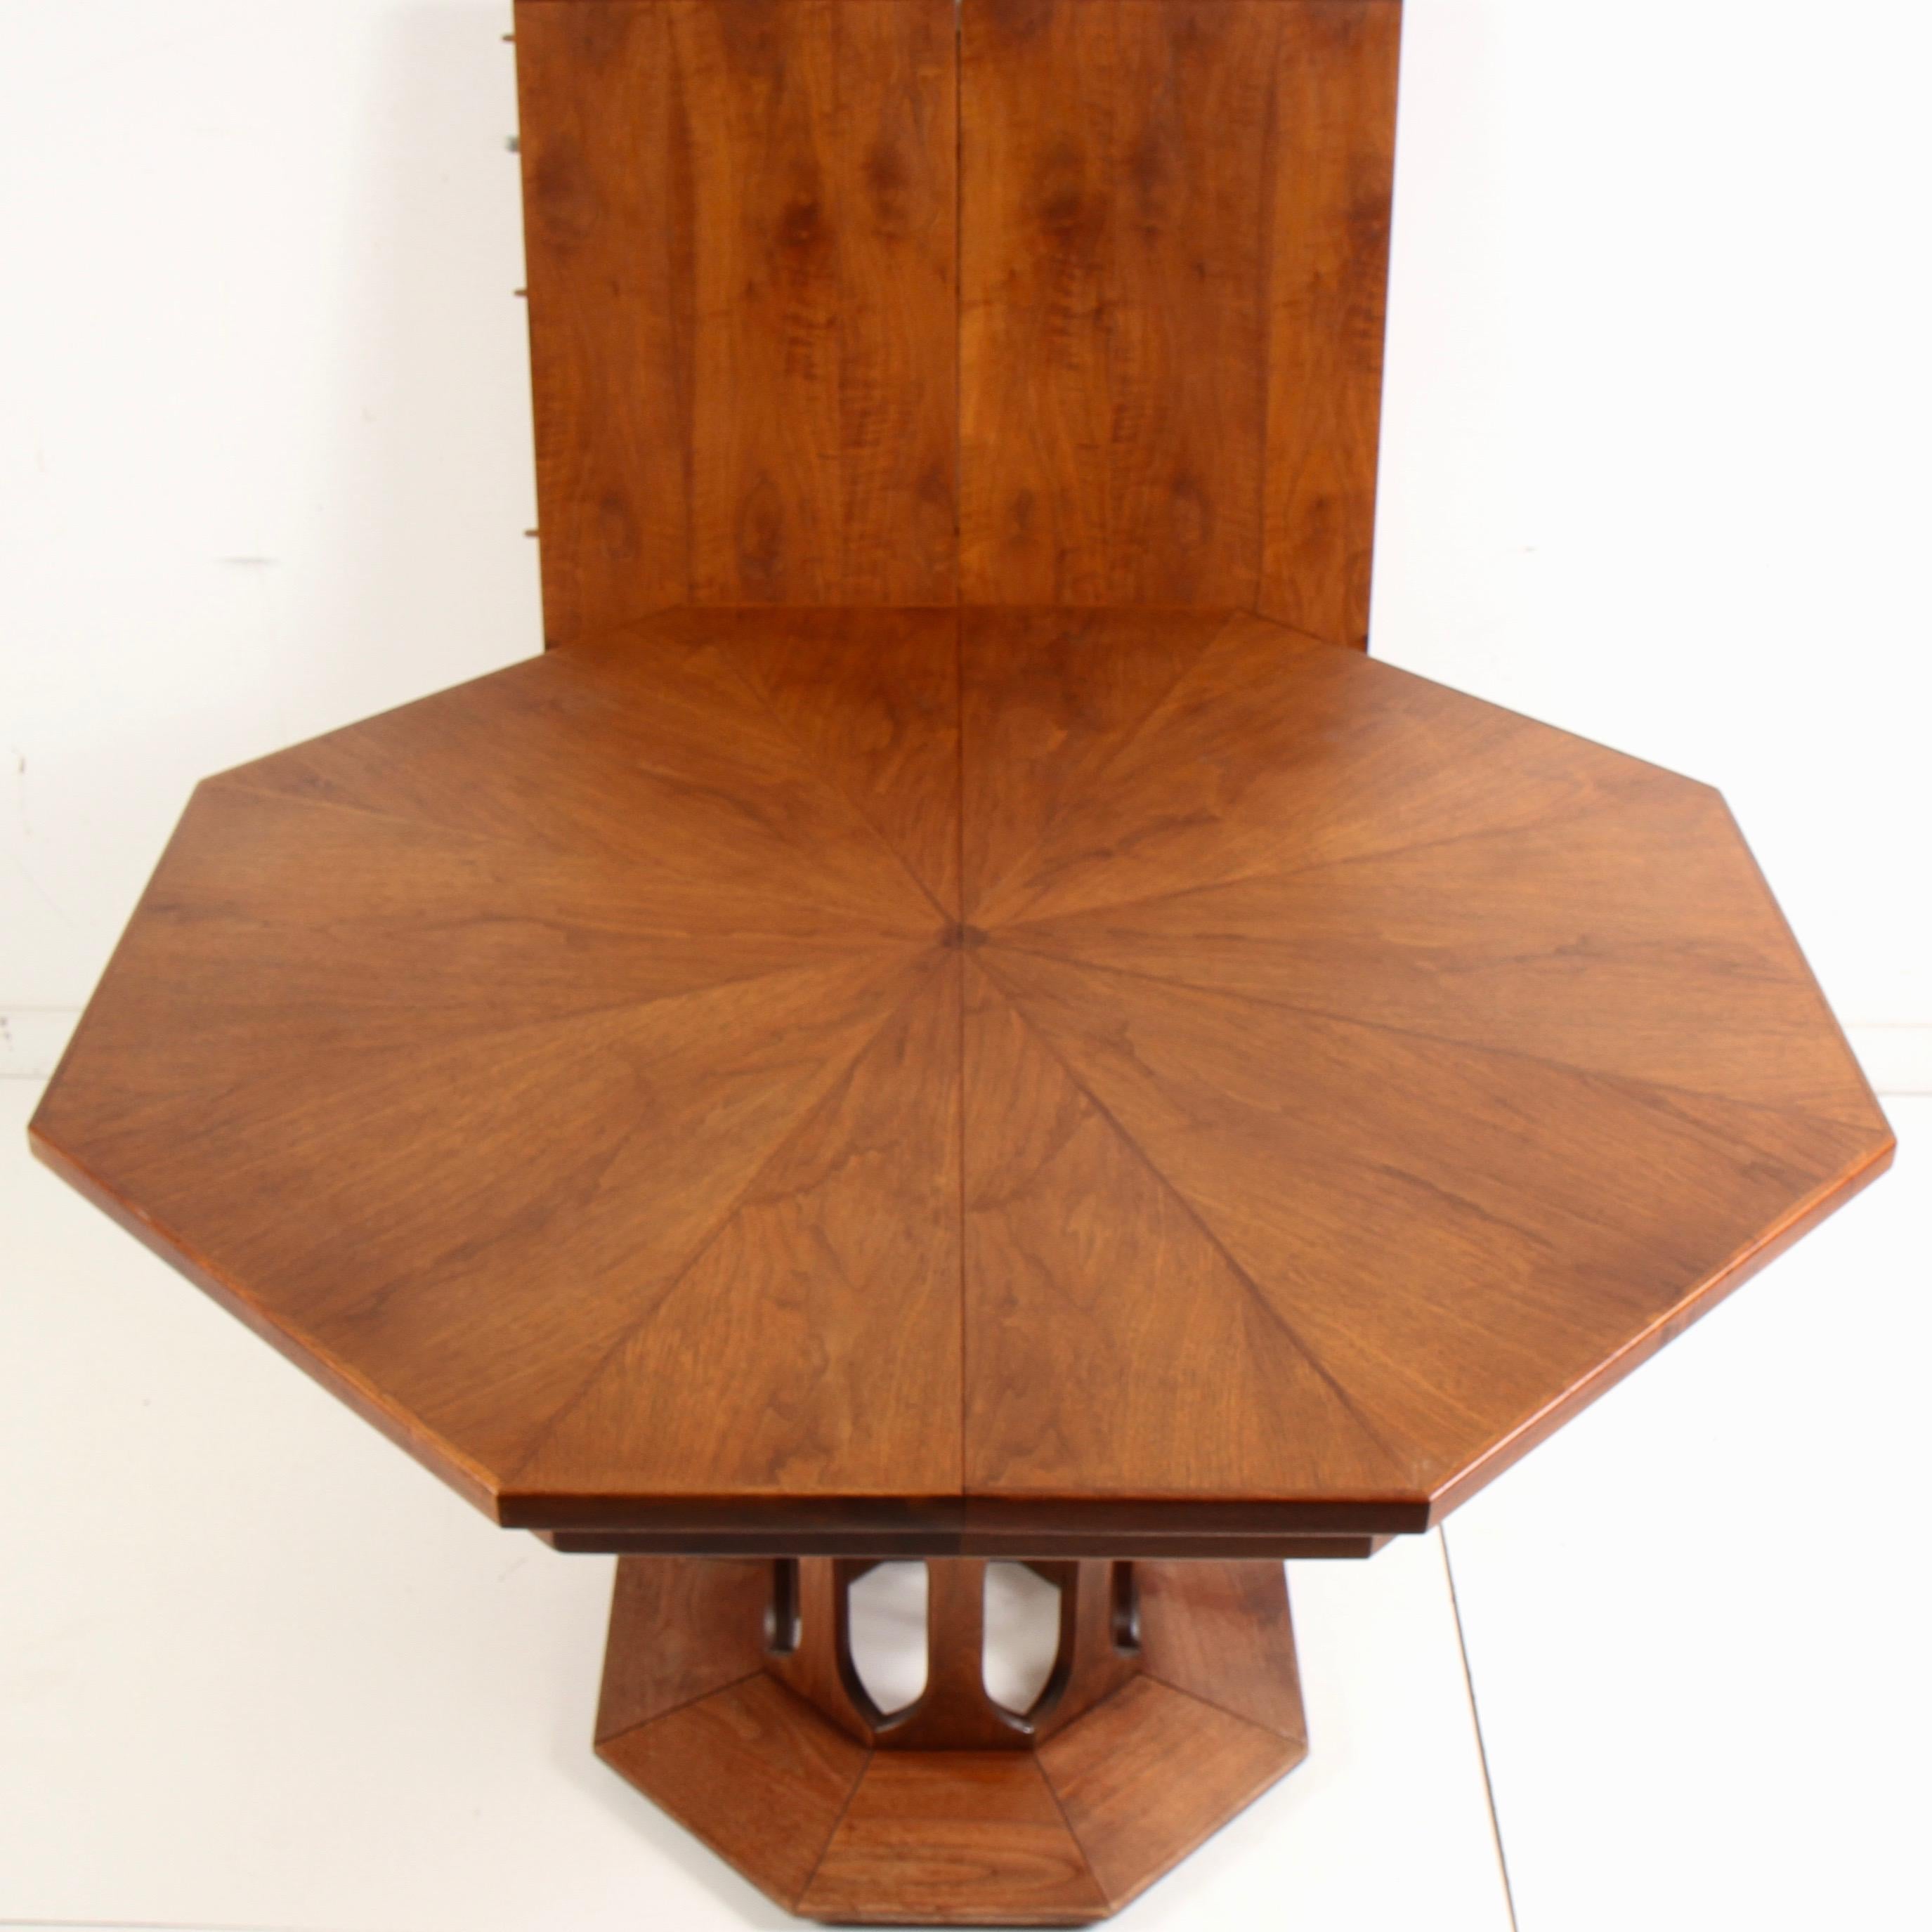 This table, by renowned Mid-Century Modern designer Harvey Probber, is part of Foster McDavid's Intaglio collection is in really clean original condition. It has never been refinished; so years down the road it can be, when and if needed. The top